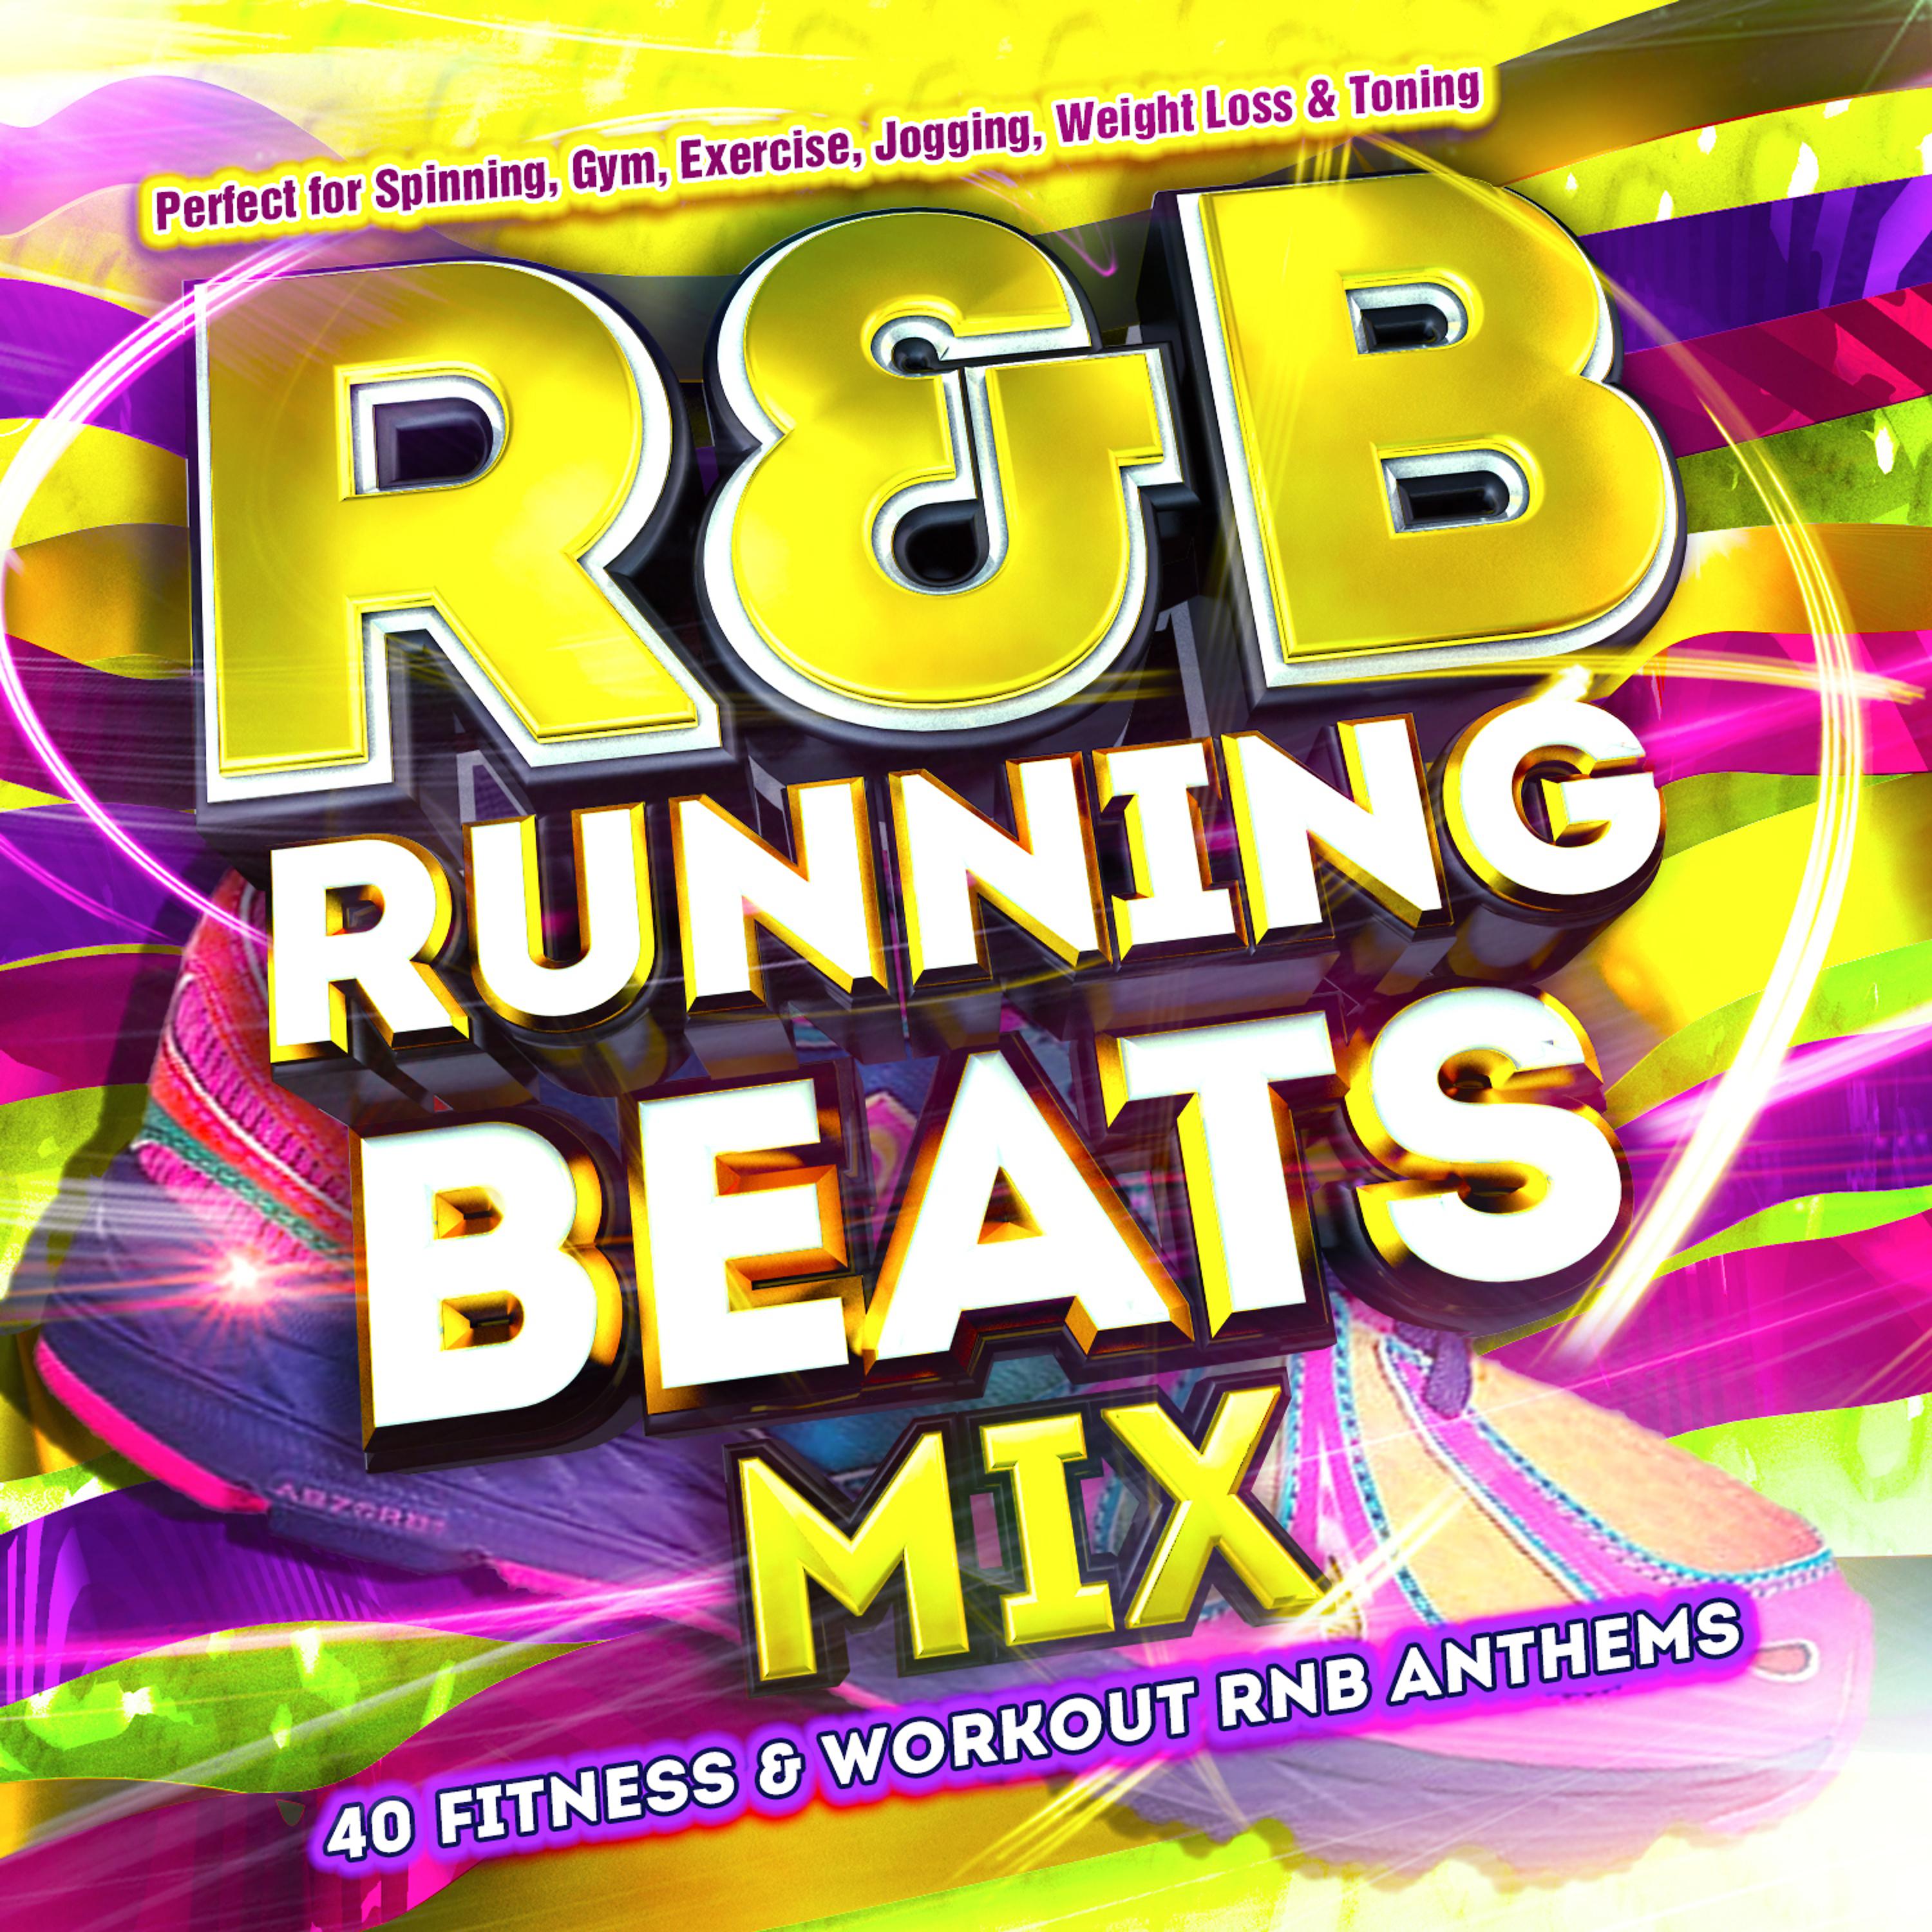 Постер альбома R&B Running Beats Mix - 40 Fitness & Workout Rnb Anthems - Perfect for Spinning, Gym, Exercise, Jogging, Weight Loss & Toning